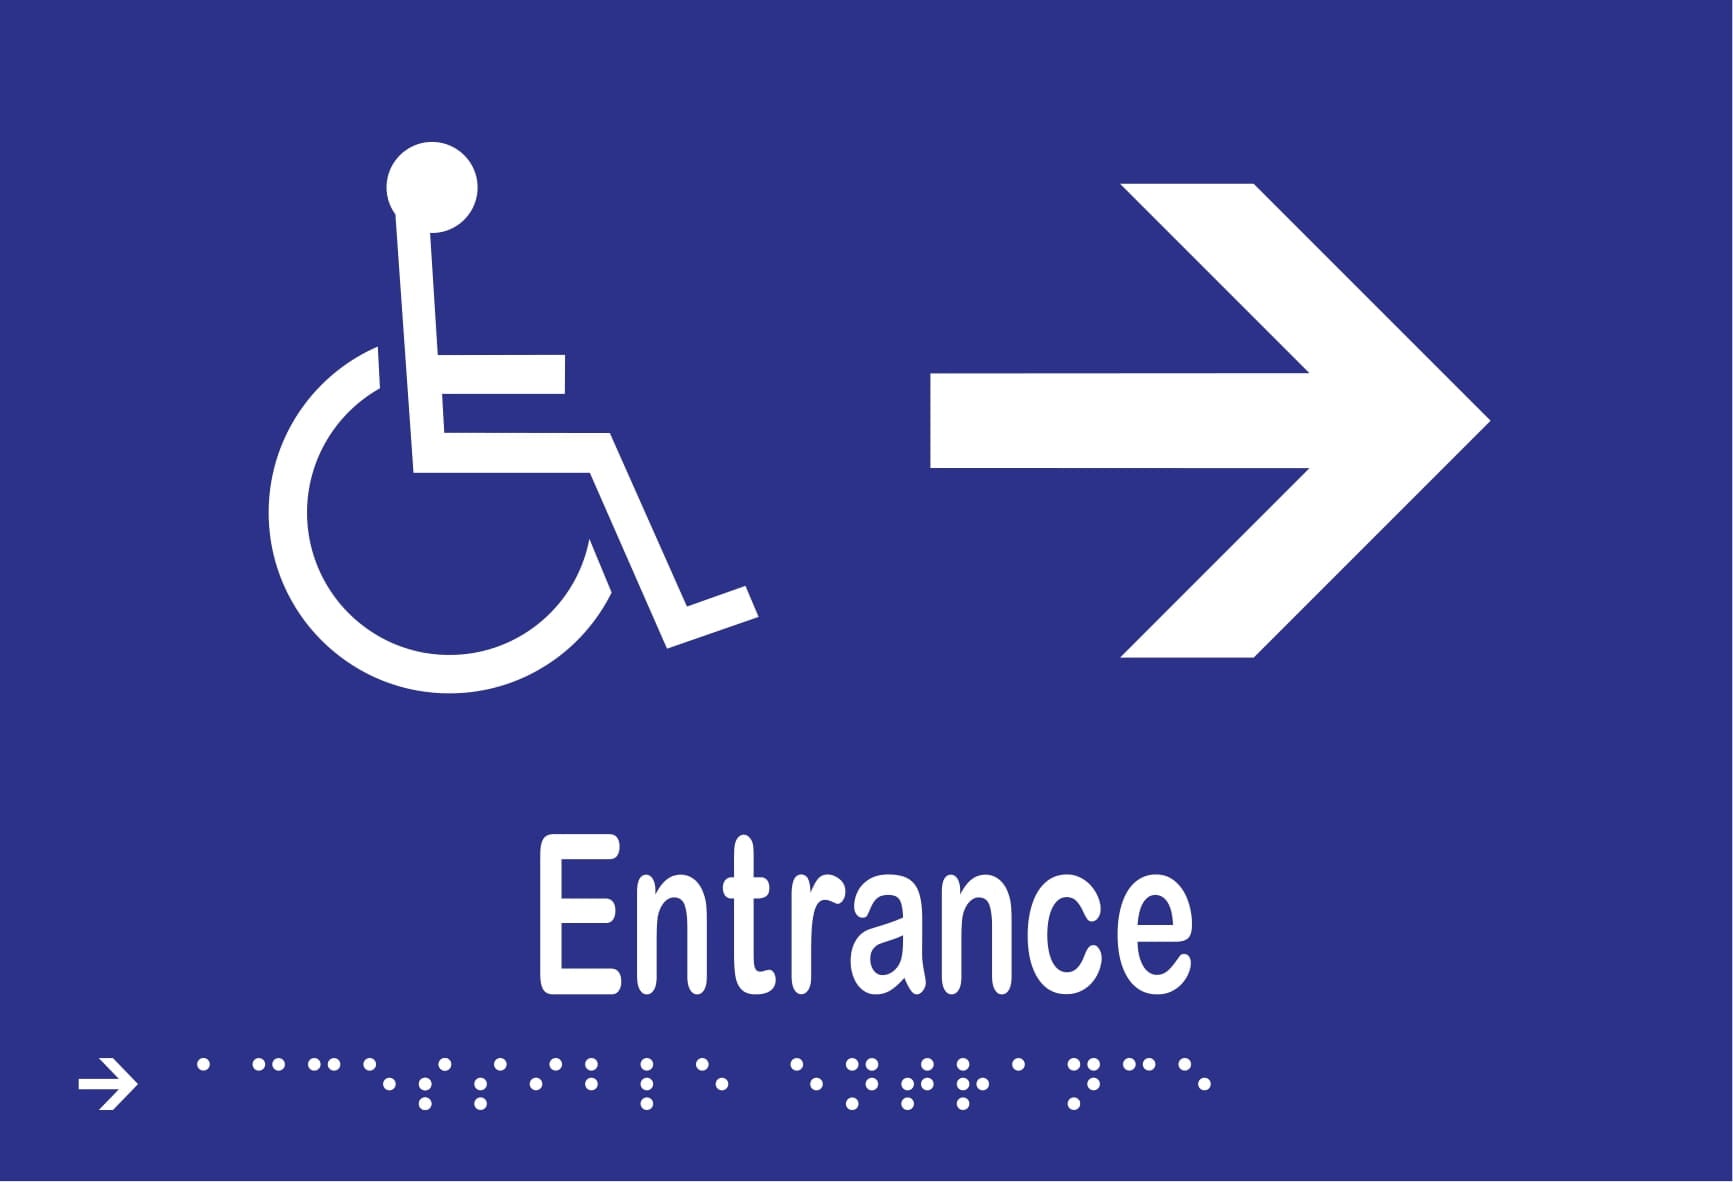 Accessible Entrance & Right Arrow Braille 220mmW x 150mmH